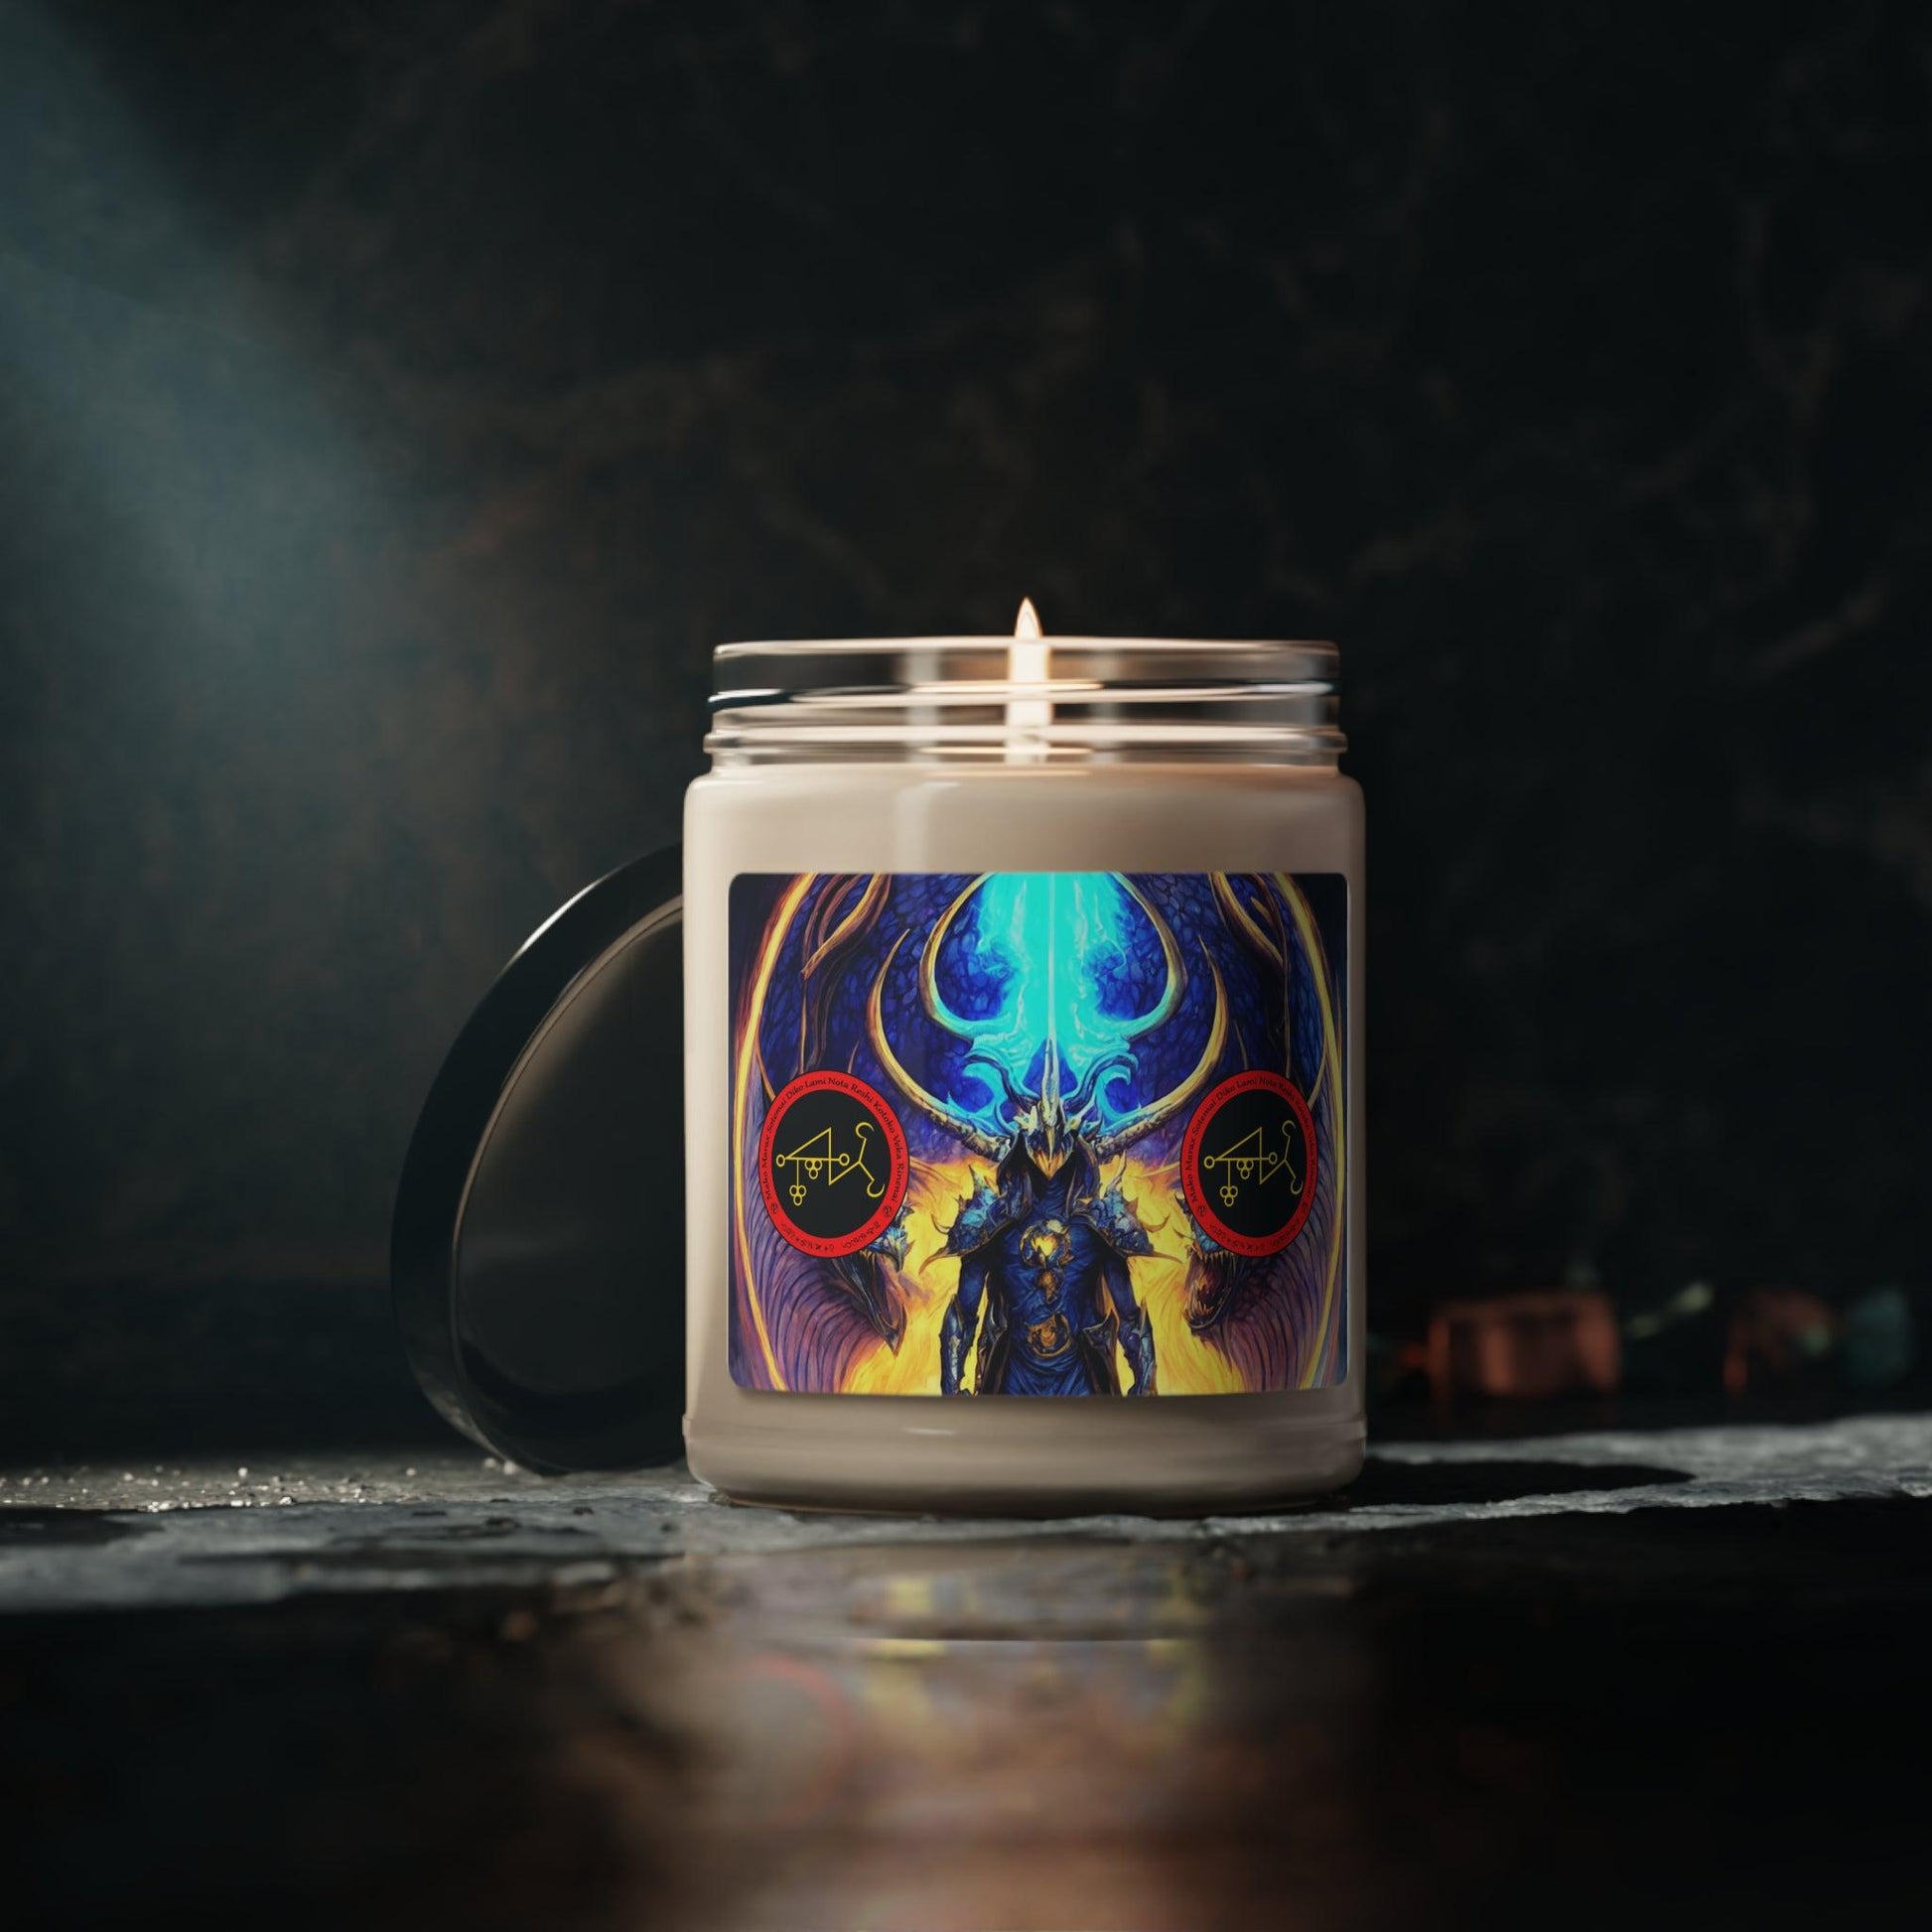 Demon-Marax-Altar-Scented-Soy-Candle-To-Learn-Magic-and-witchcraft-in-offerings-rituals-initiations-or-praying-and-meditation-5